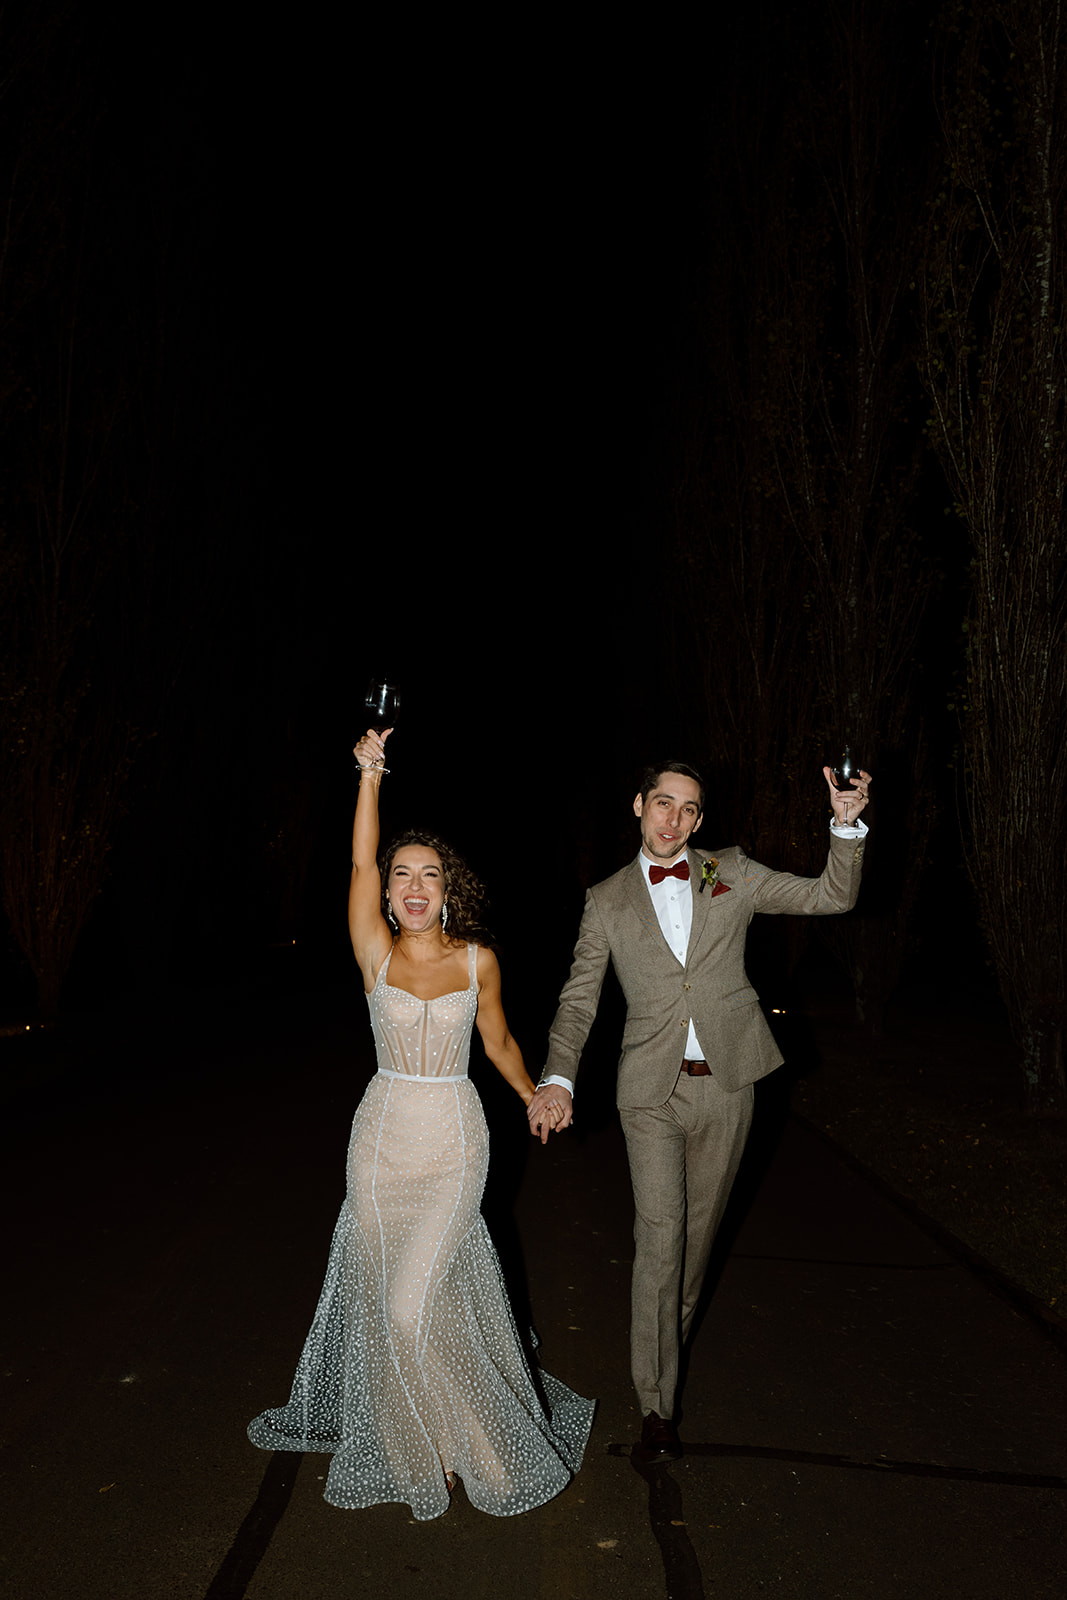 Night portrait shots with the couple at the wedding in the Southern Highlands Bendooley Estate